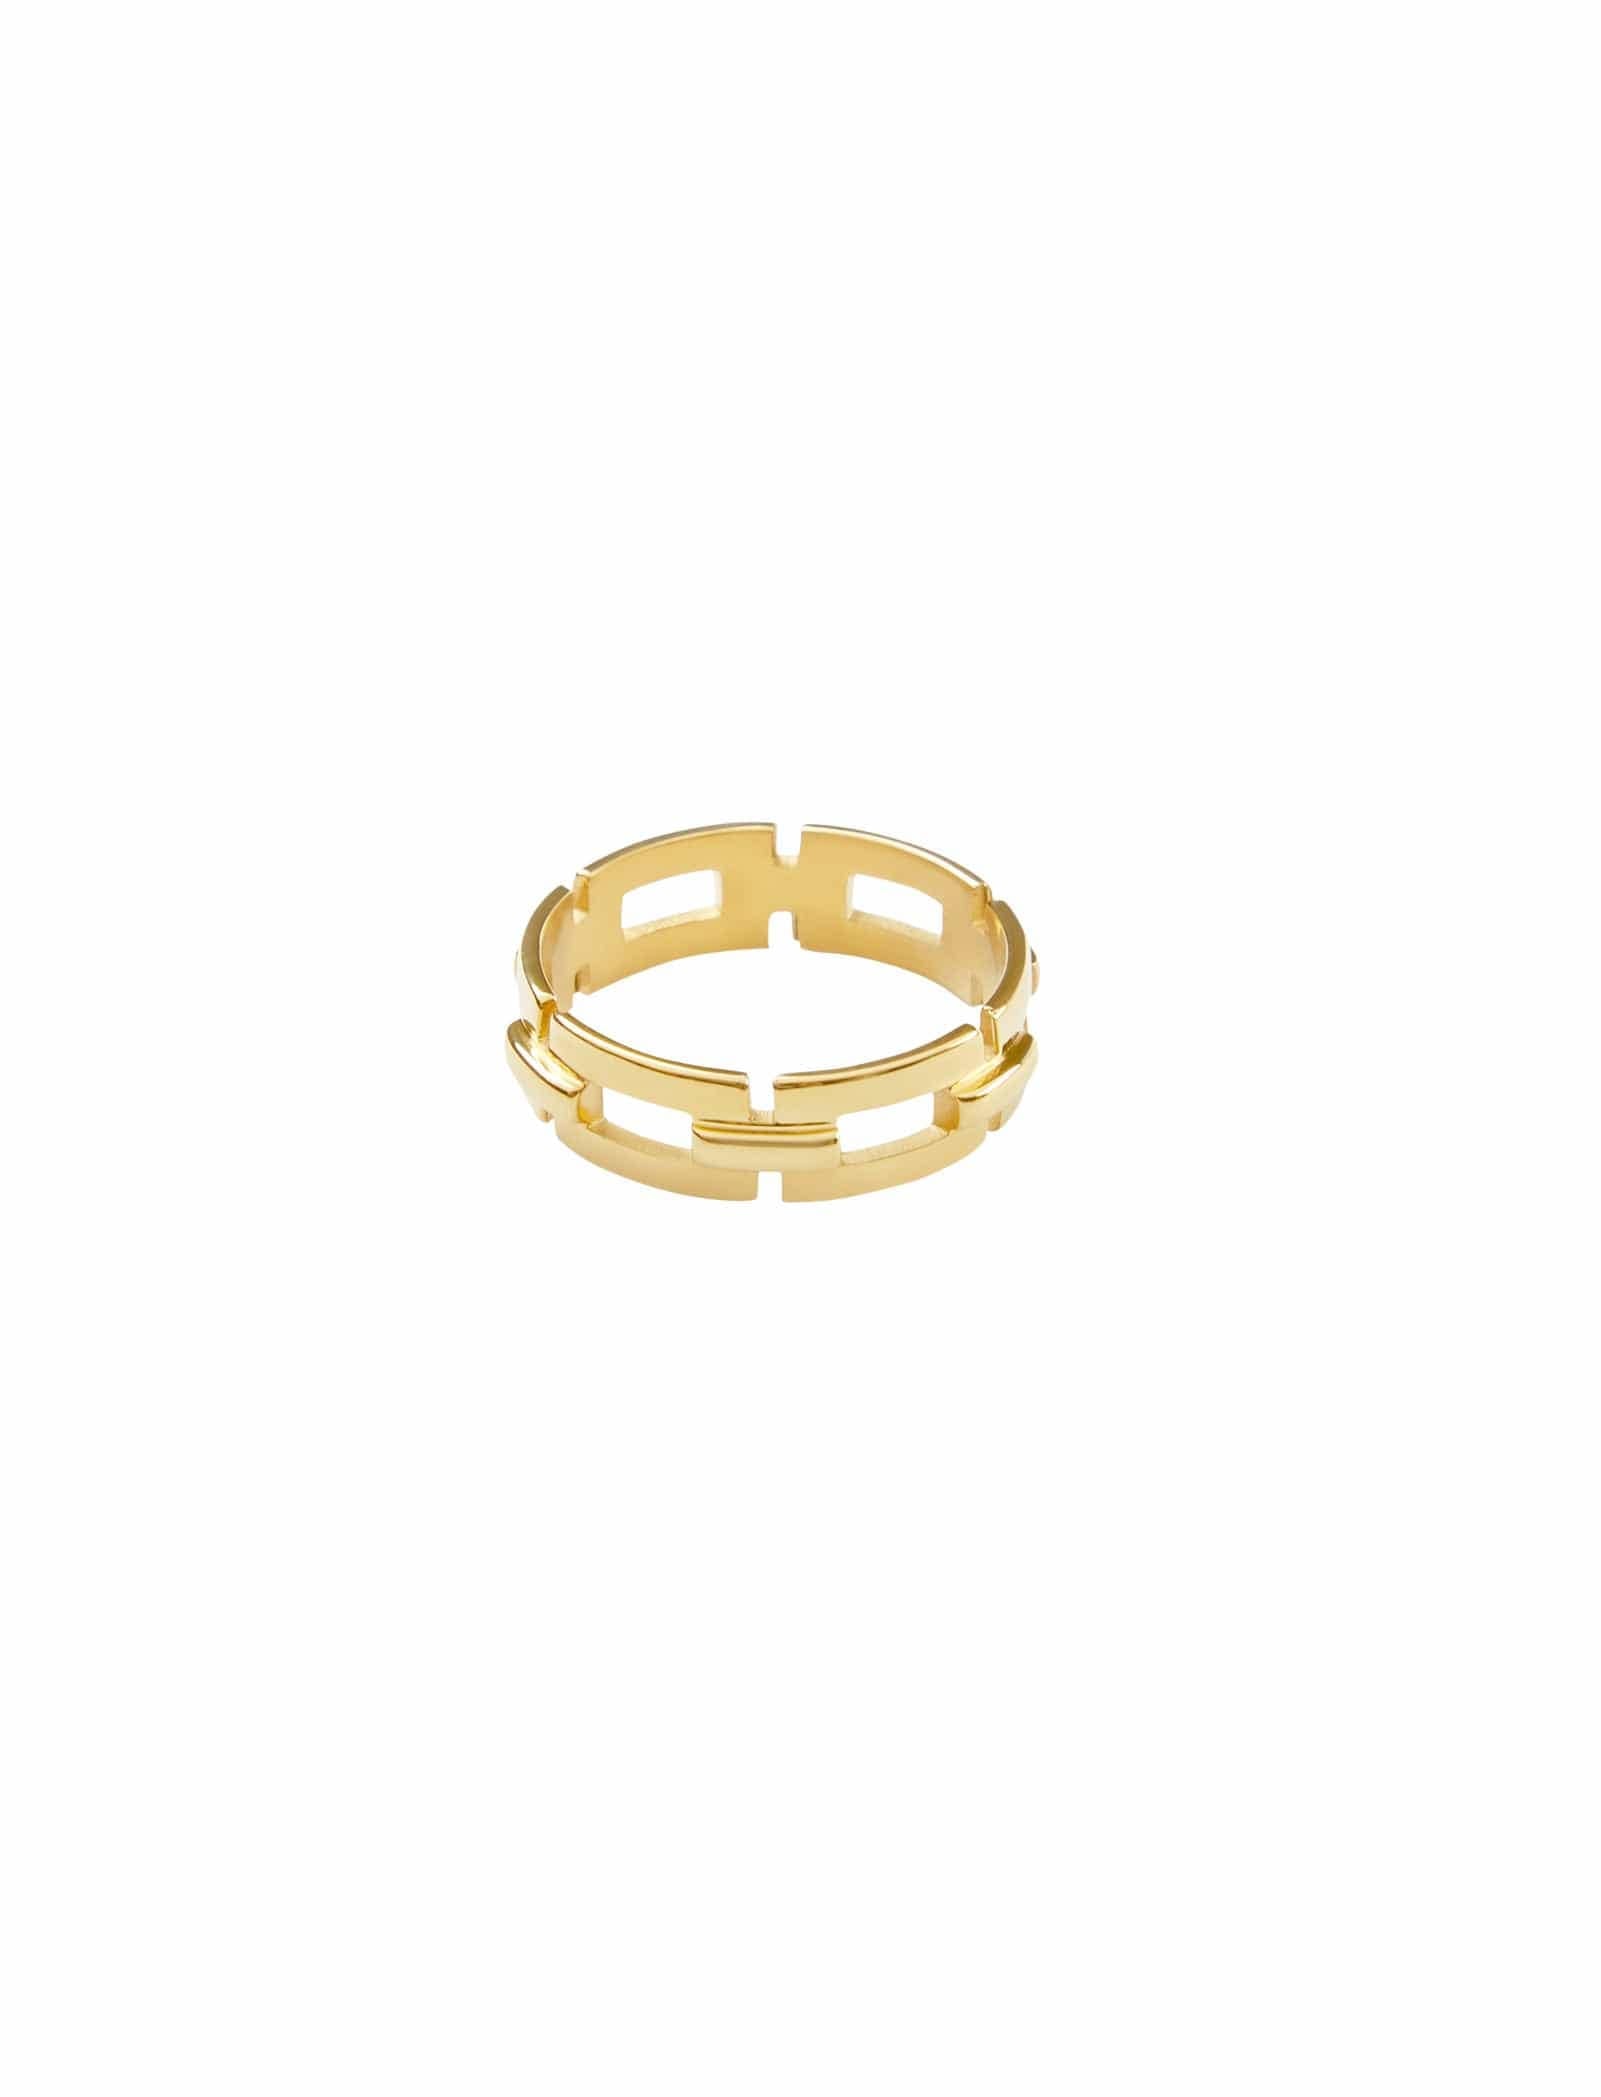 Muse Ring | Pastiche | Reviews on Judge.me